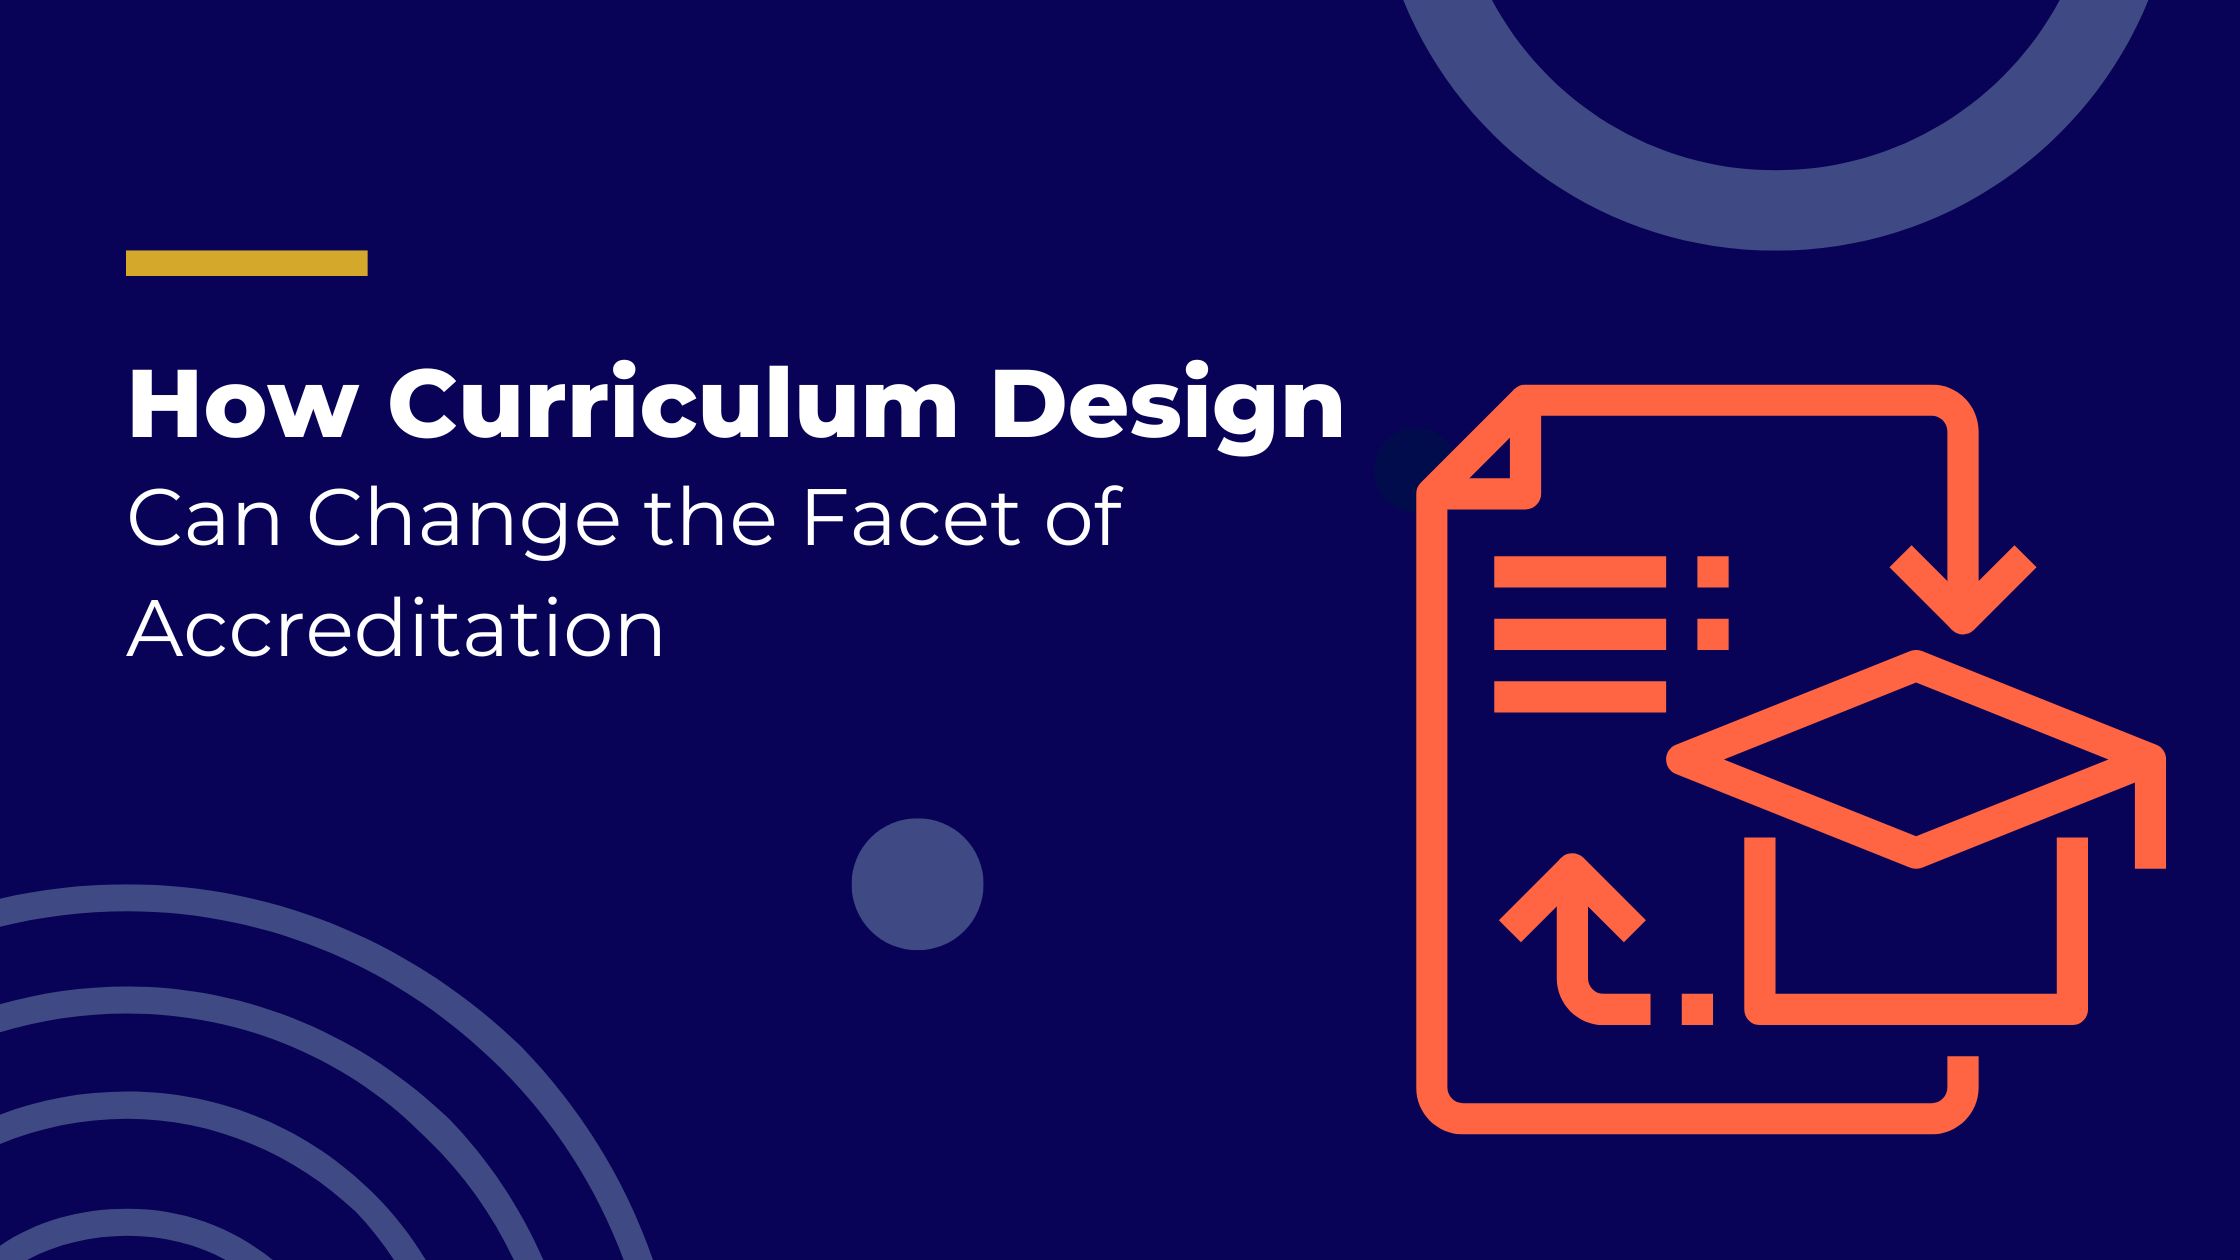 How Curriculum Design Can Change the Facet of Accreditation